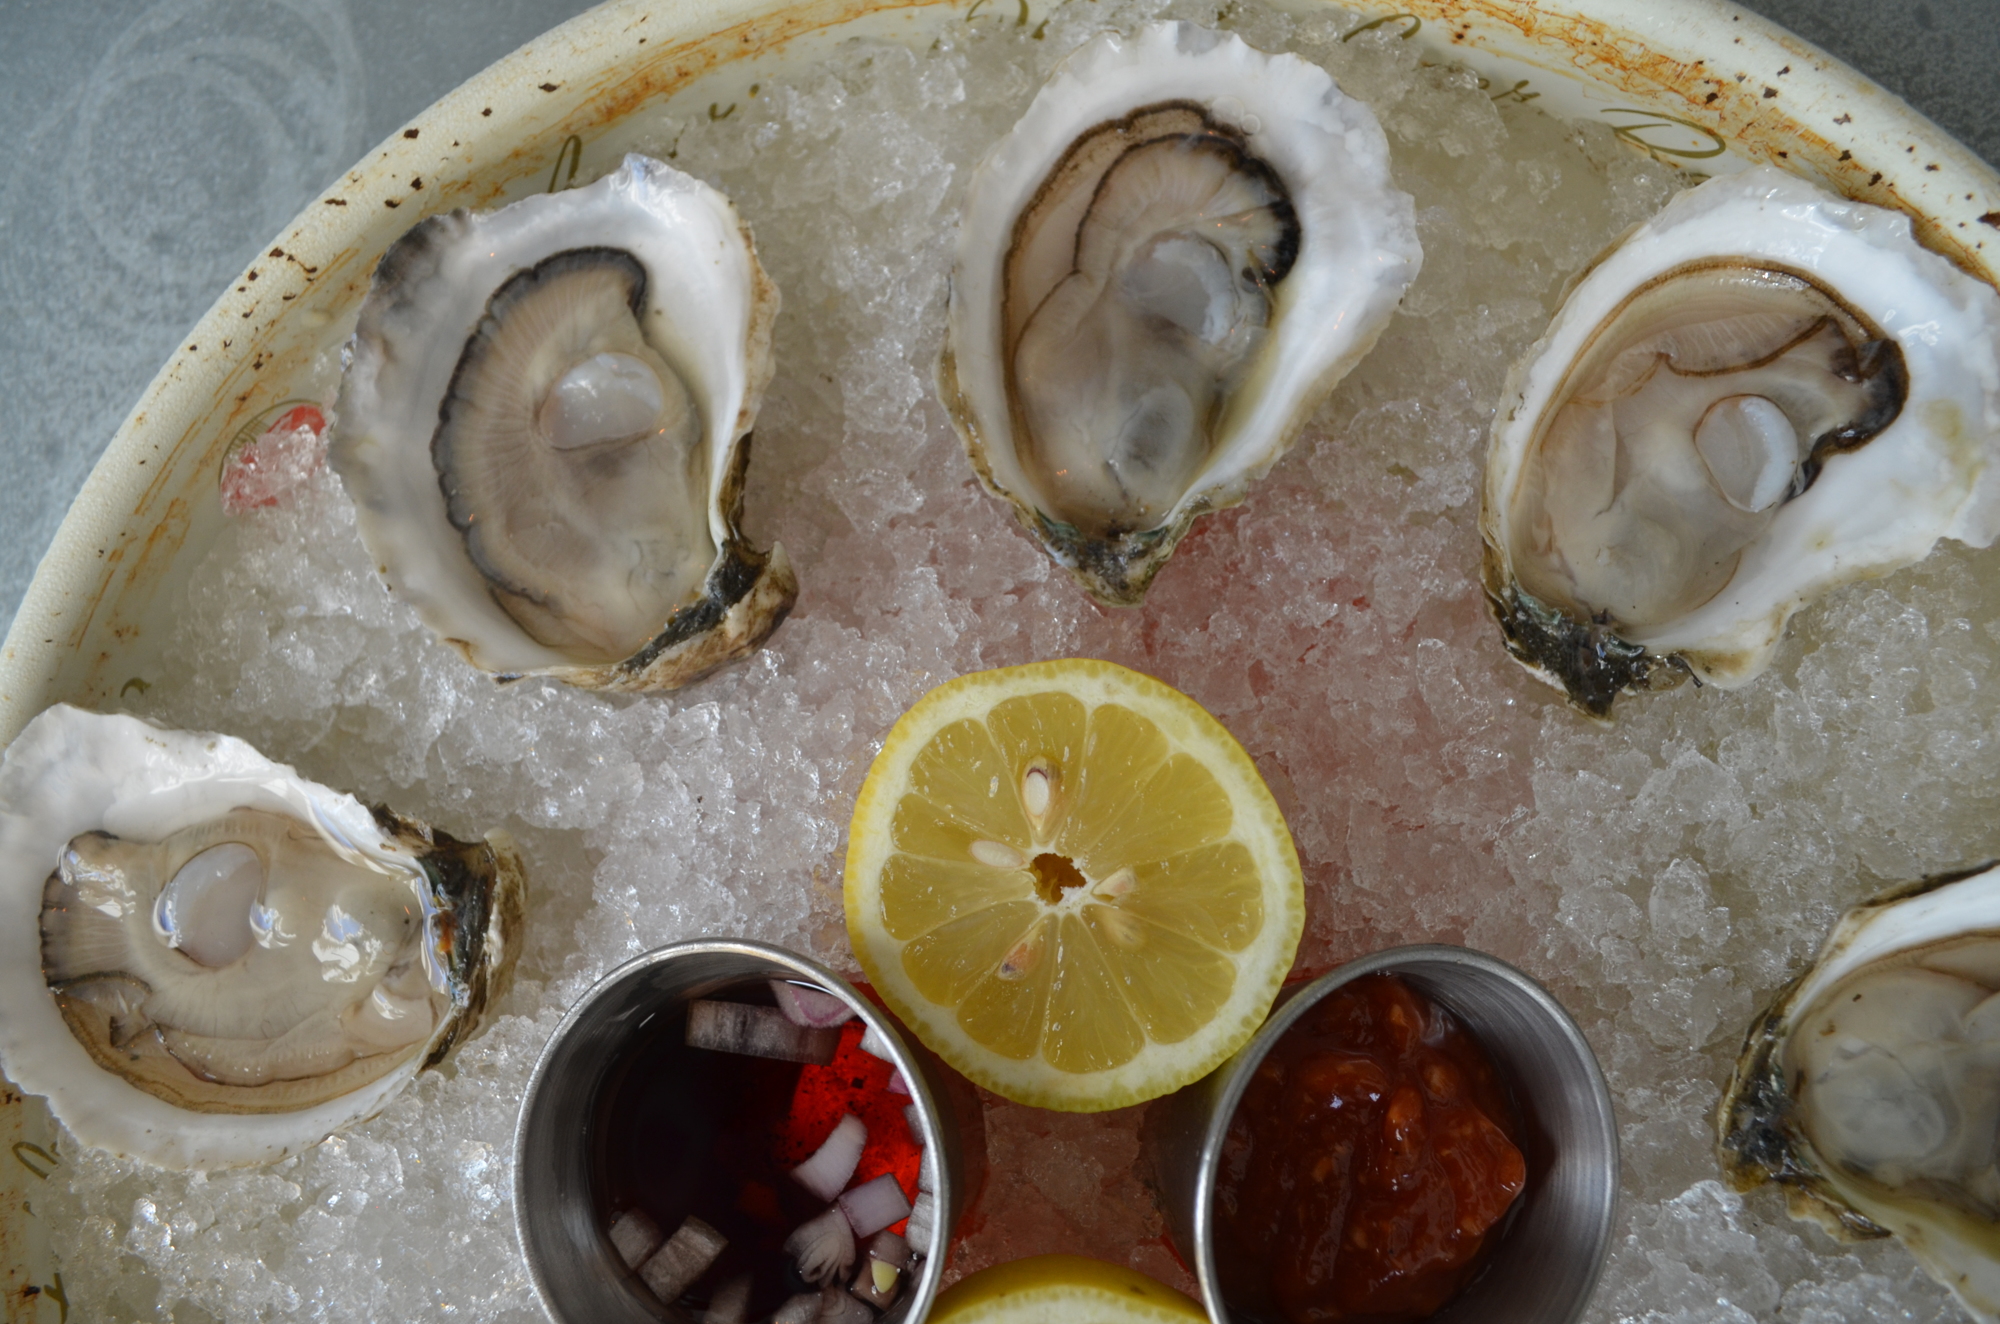 Photos by Nick Friedman At any given time, Veronica Fish and Oyster has at least seven varieties of oyster on the menu.